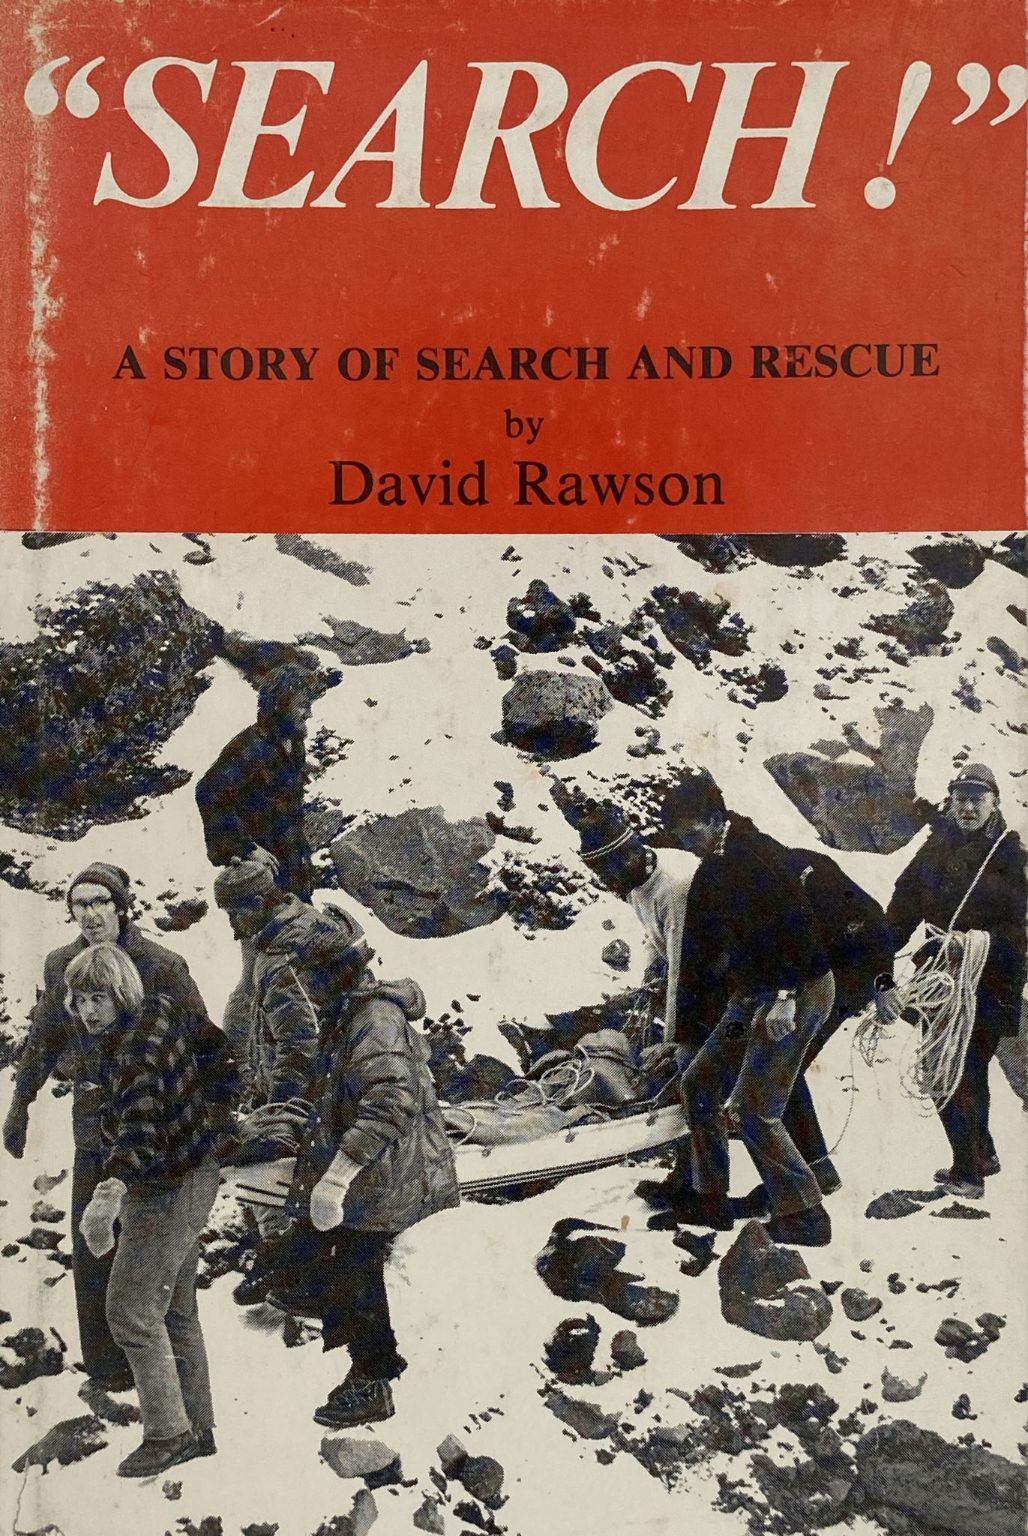 SEARCH! A Story of Search and Rescue